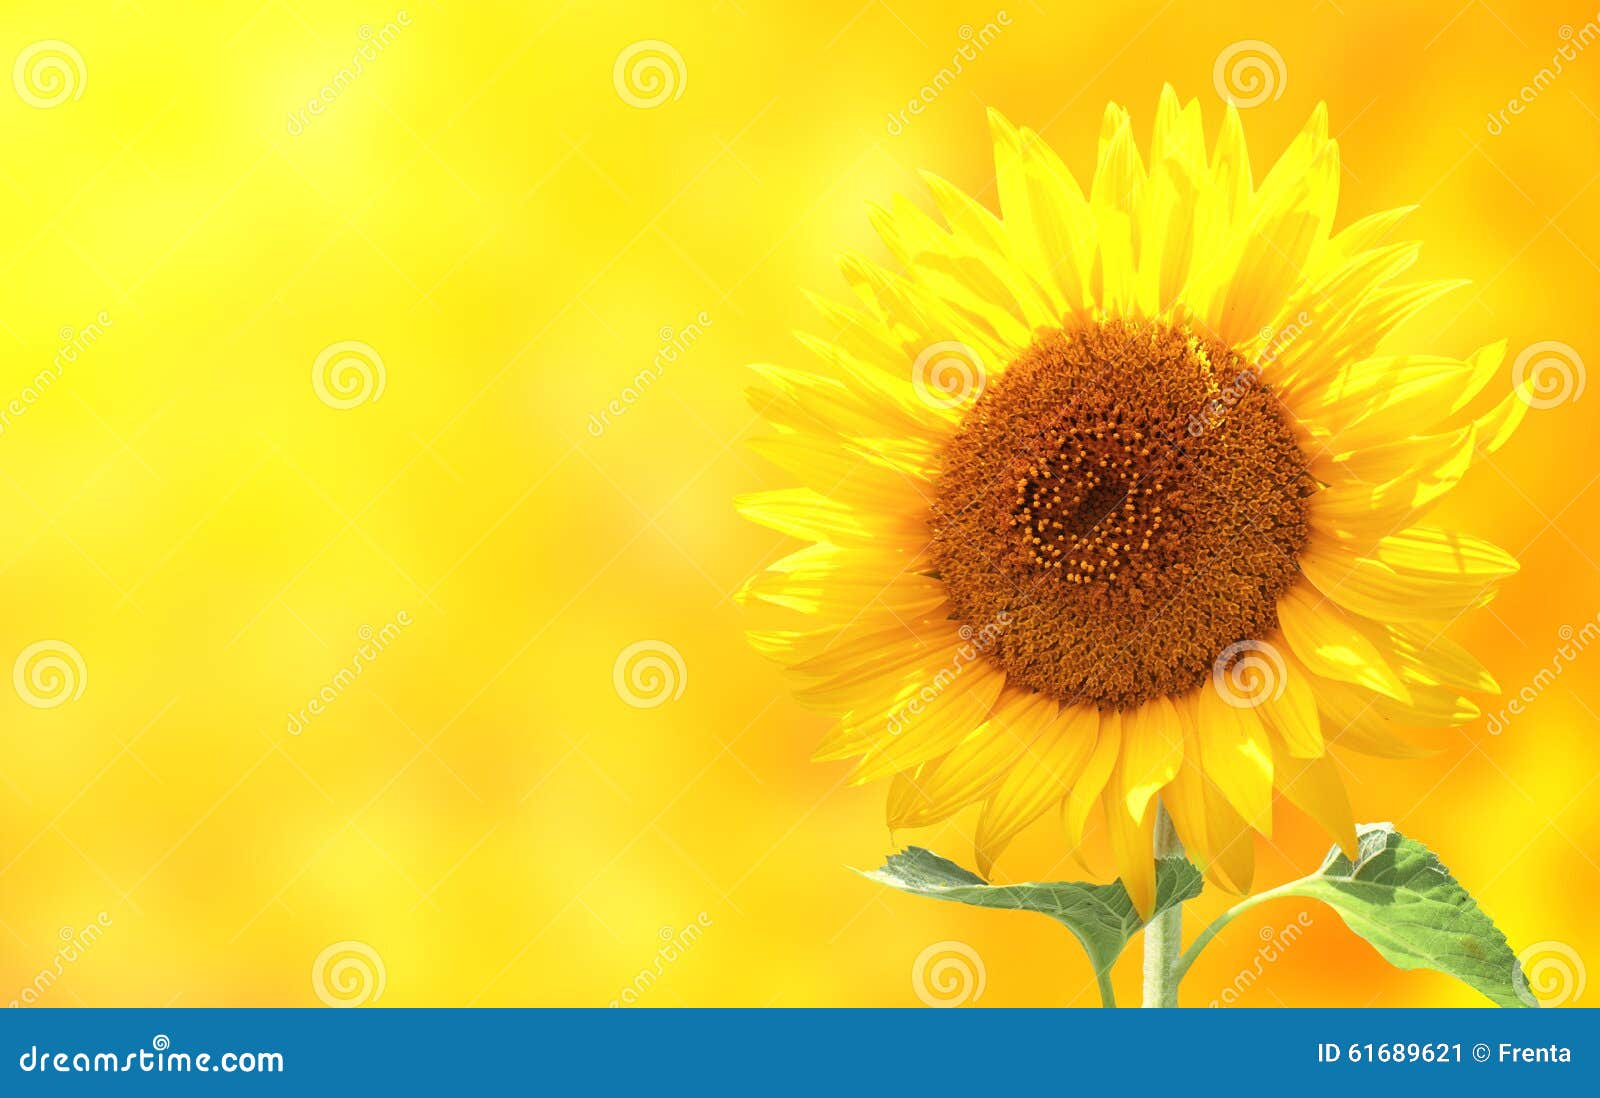 Sunflower on Yellow Background Stock Image - Image of head, floral: 61689621